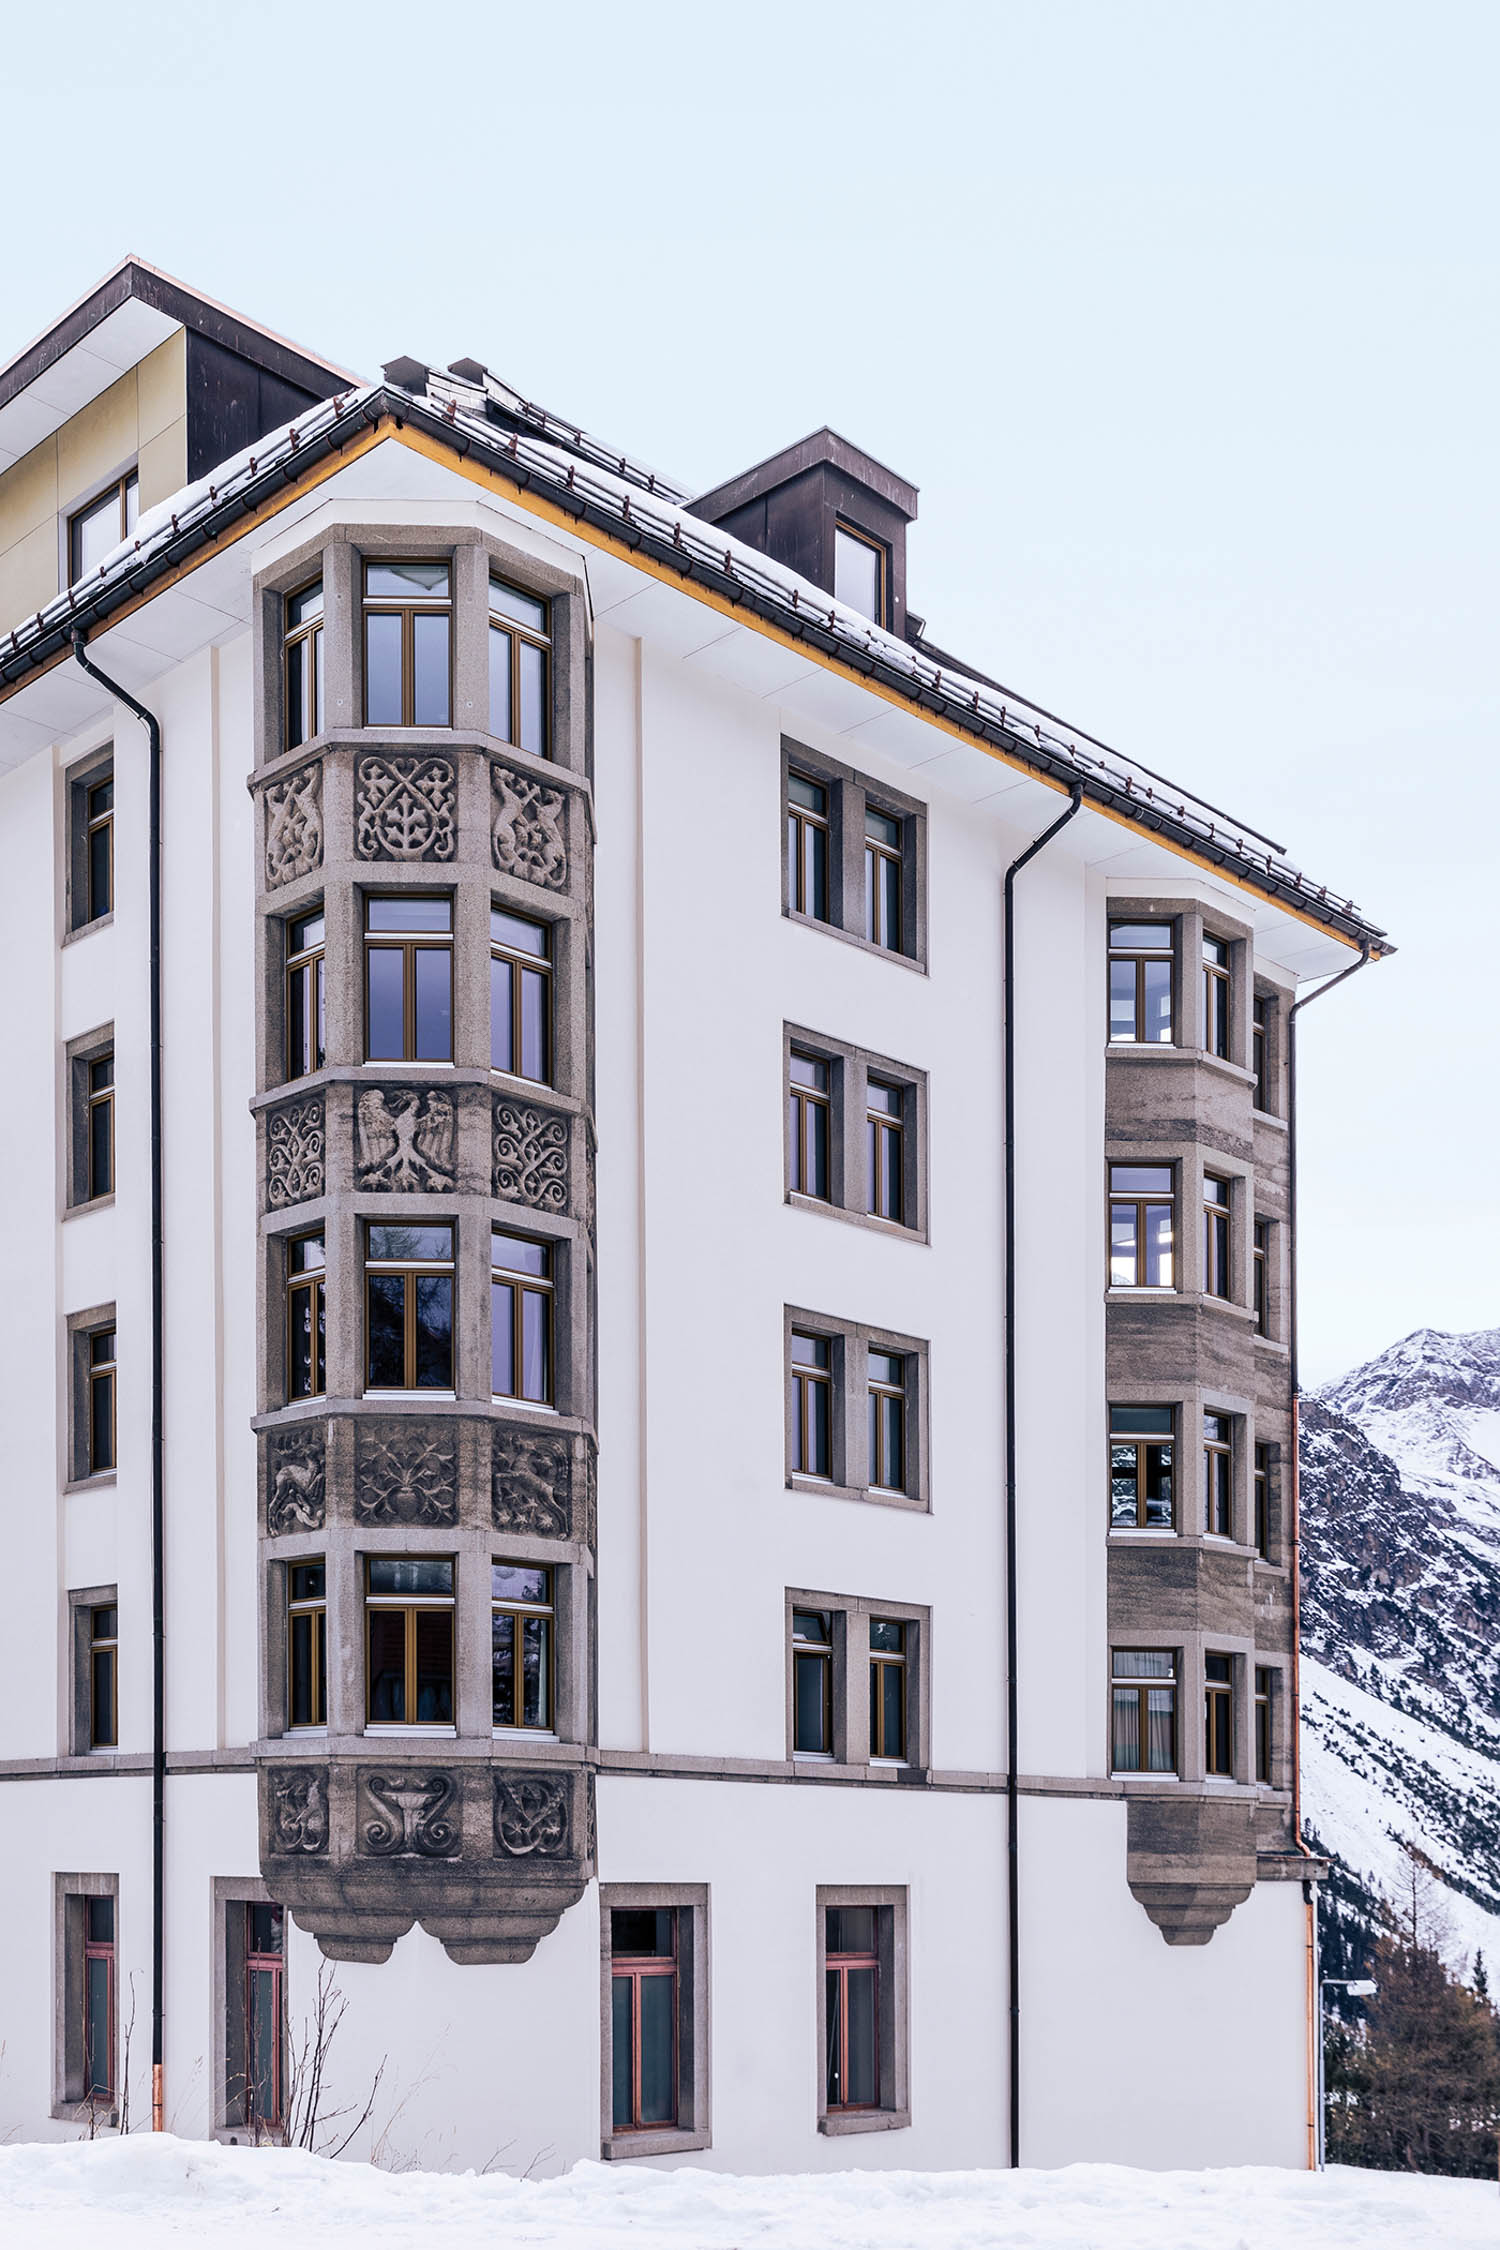 the exterior of Faern Arosa Altein, a Swiss resort designed by London firm Run for the Hills